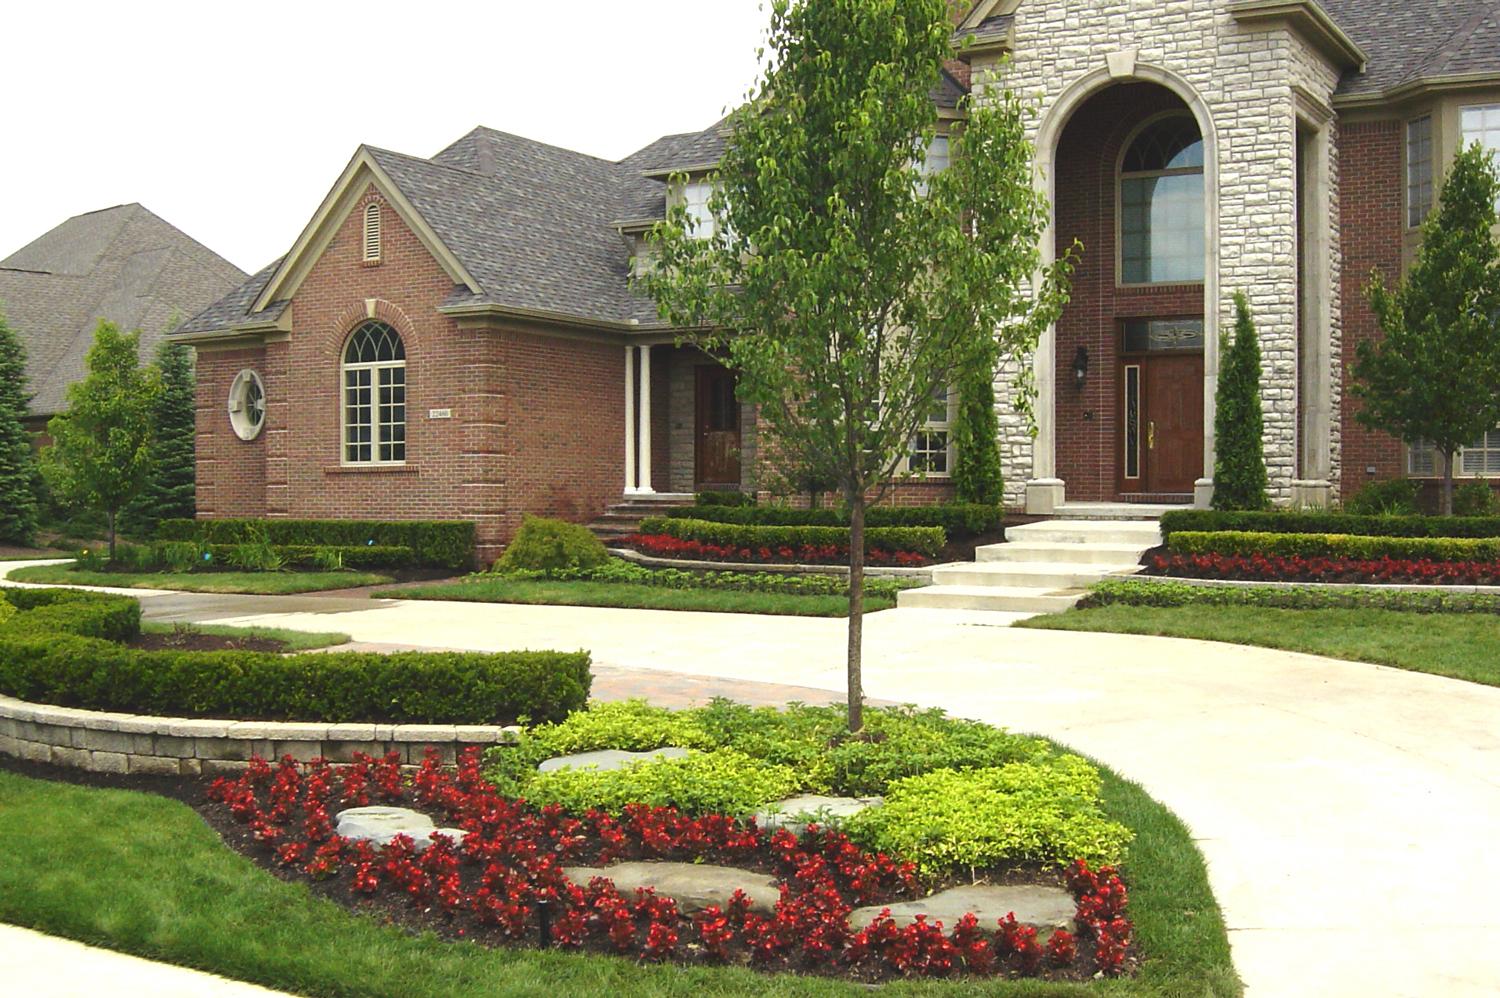 Landscaping Ideas Front Yard Curb Appeal